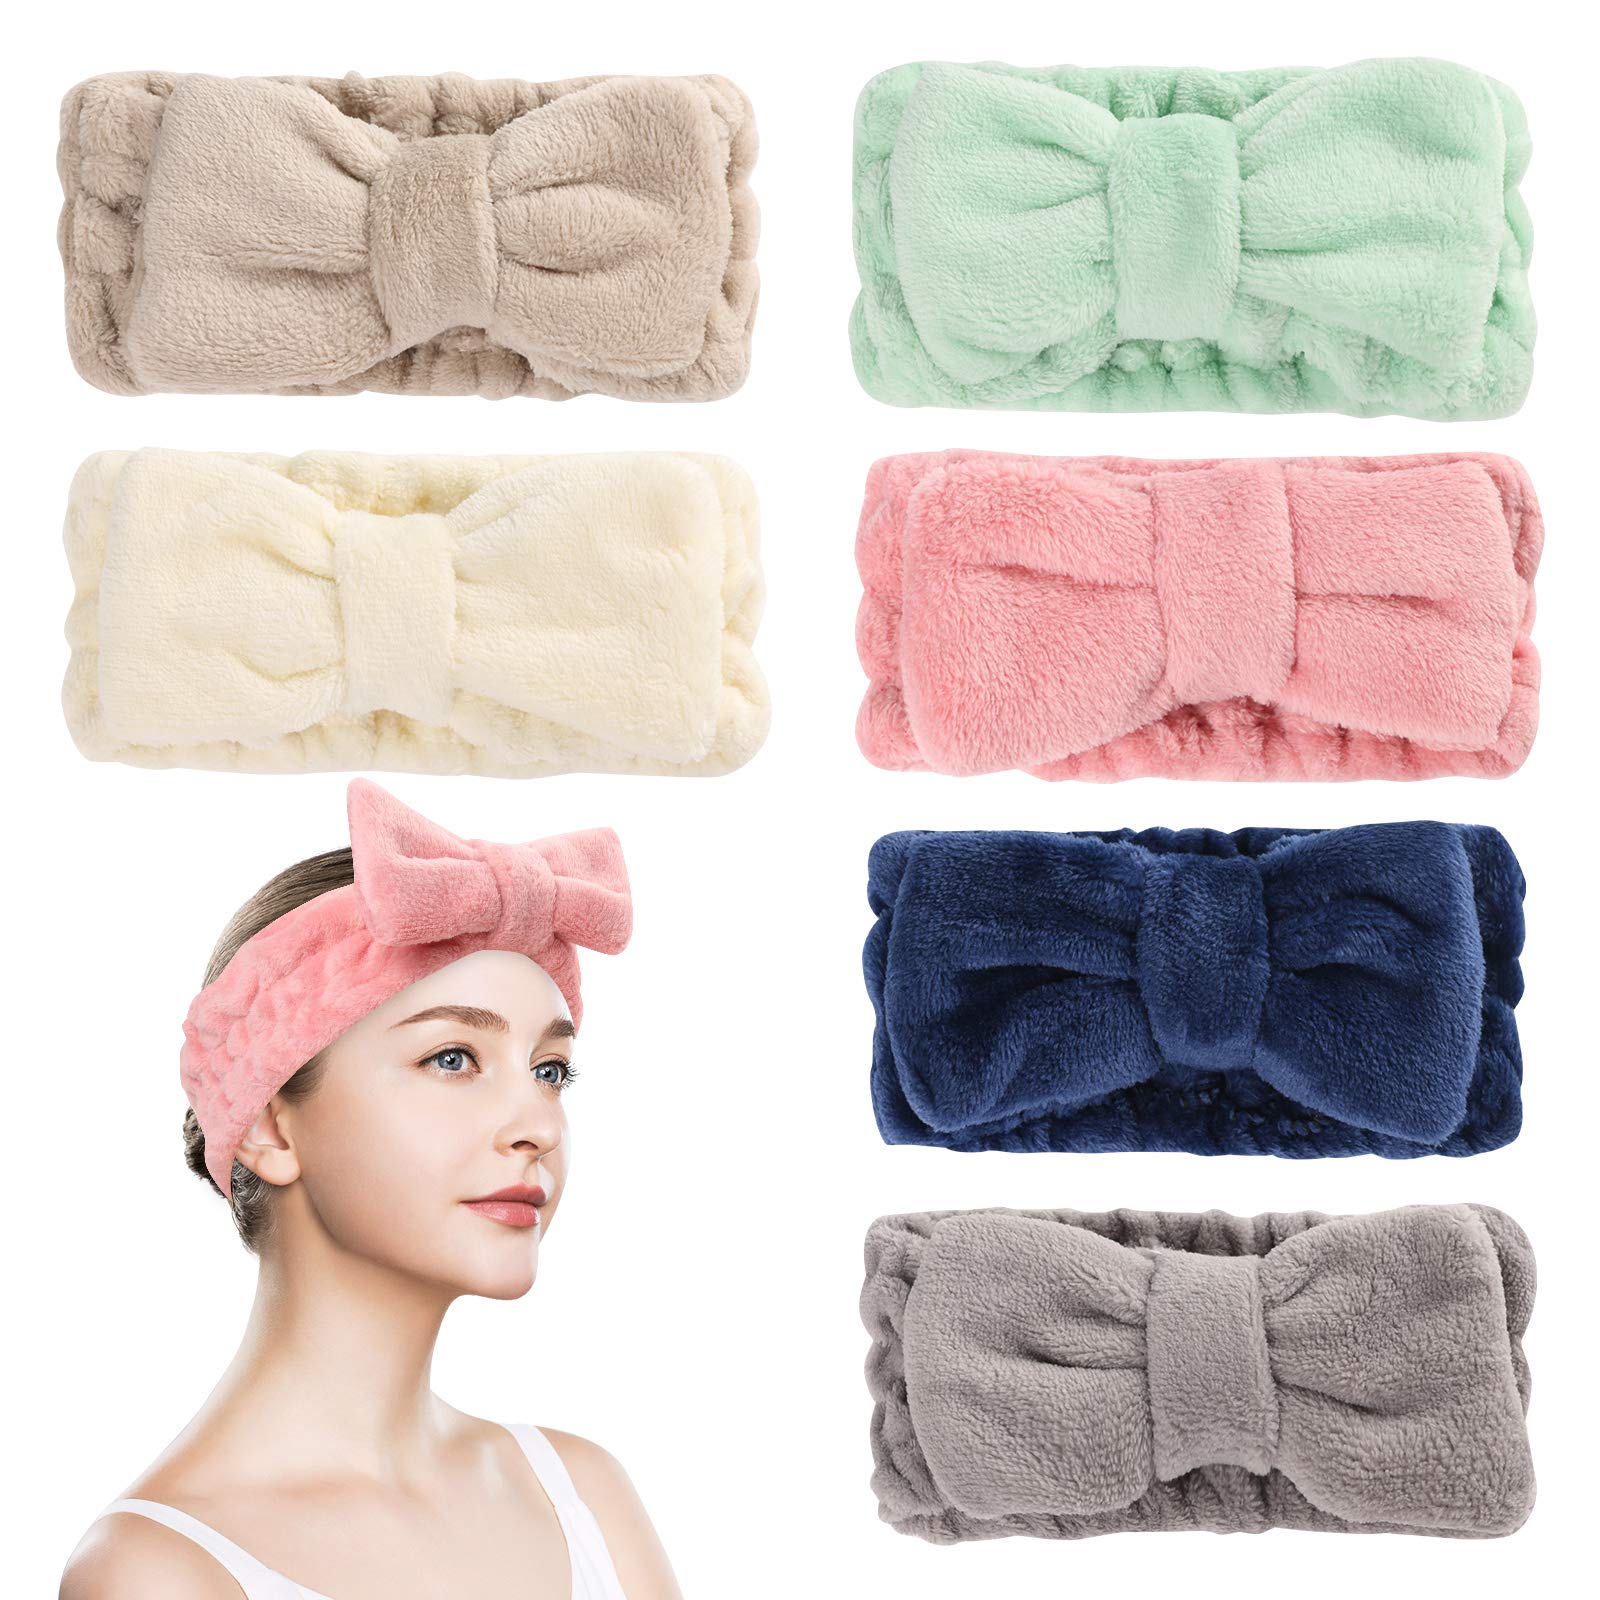 The Best Headbands for Washing Your Face: Chic Terry Cloth, Turbie Twists,  and Beyond